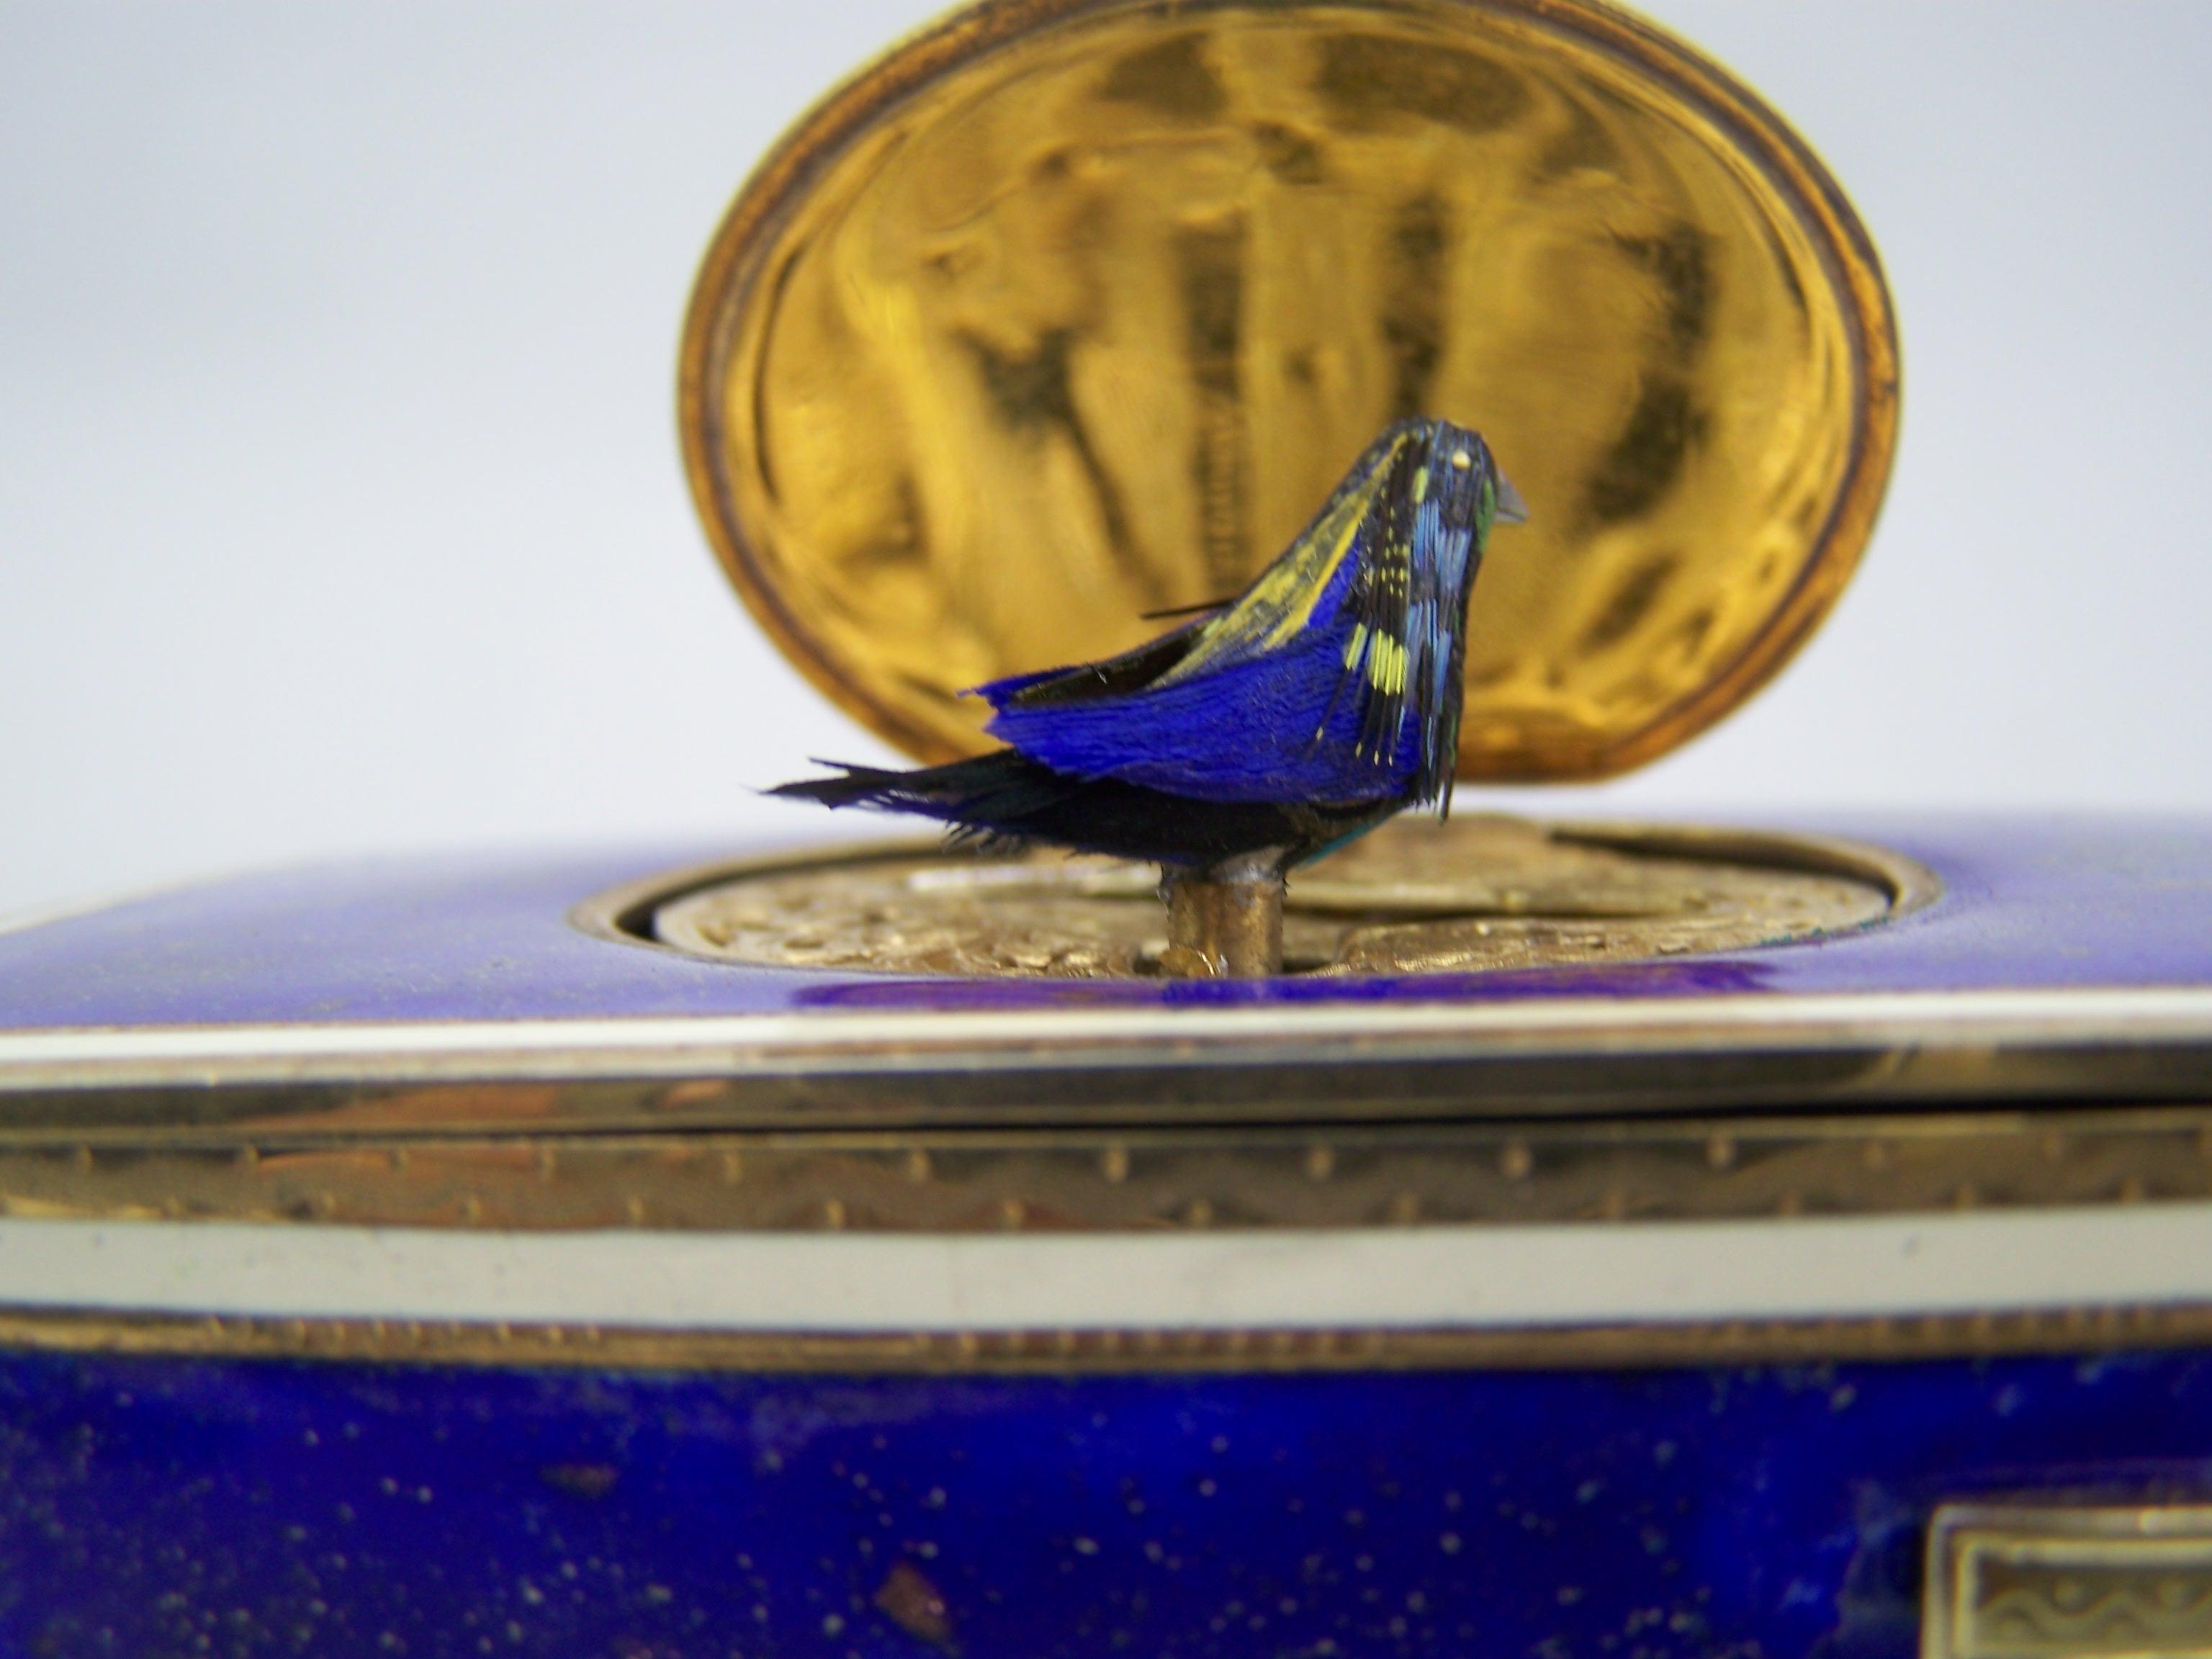 Singing bird box by K Griesbaum in guilded case and blue-goldflaked enamel 3